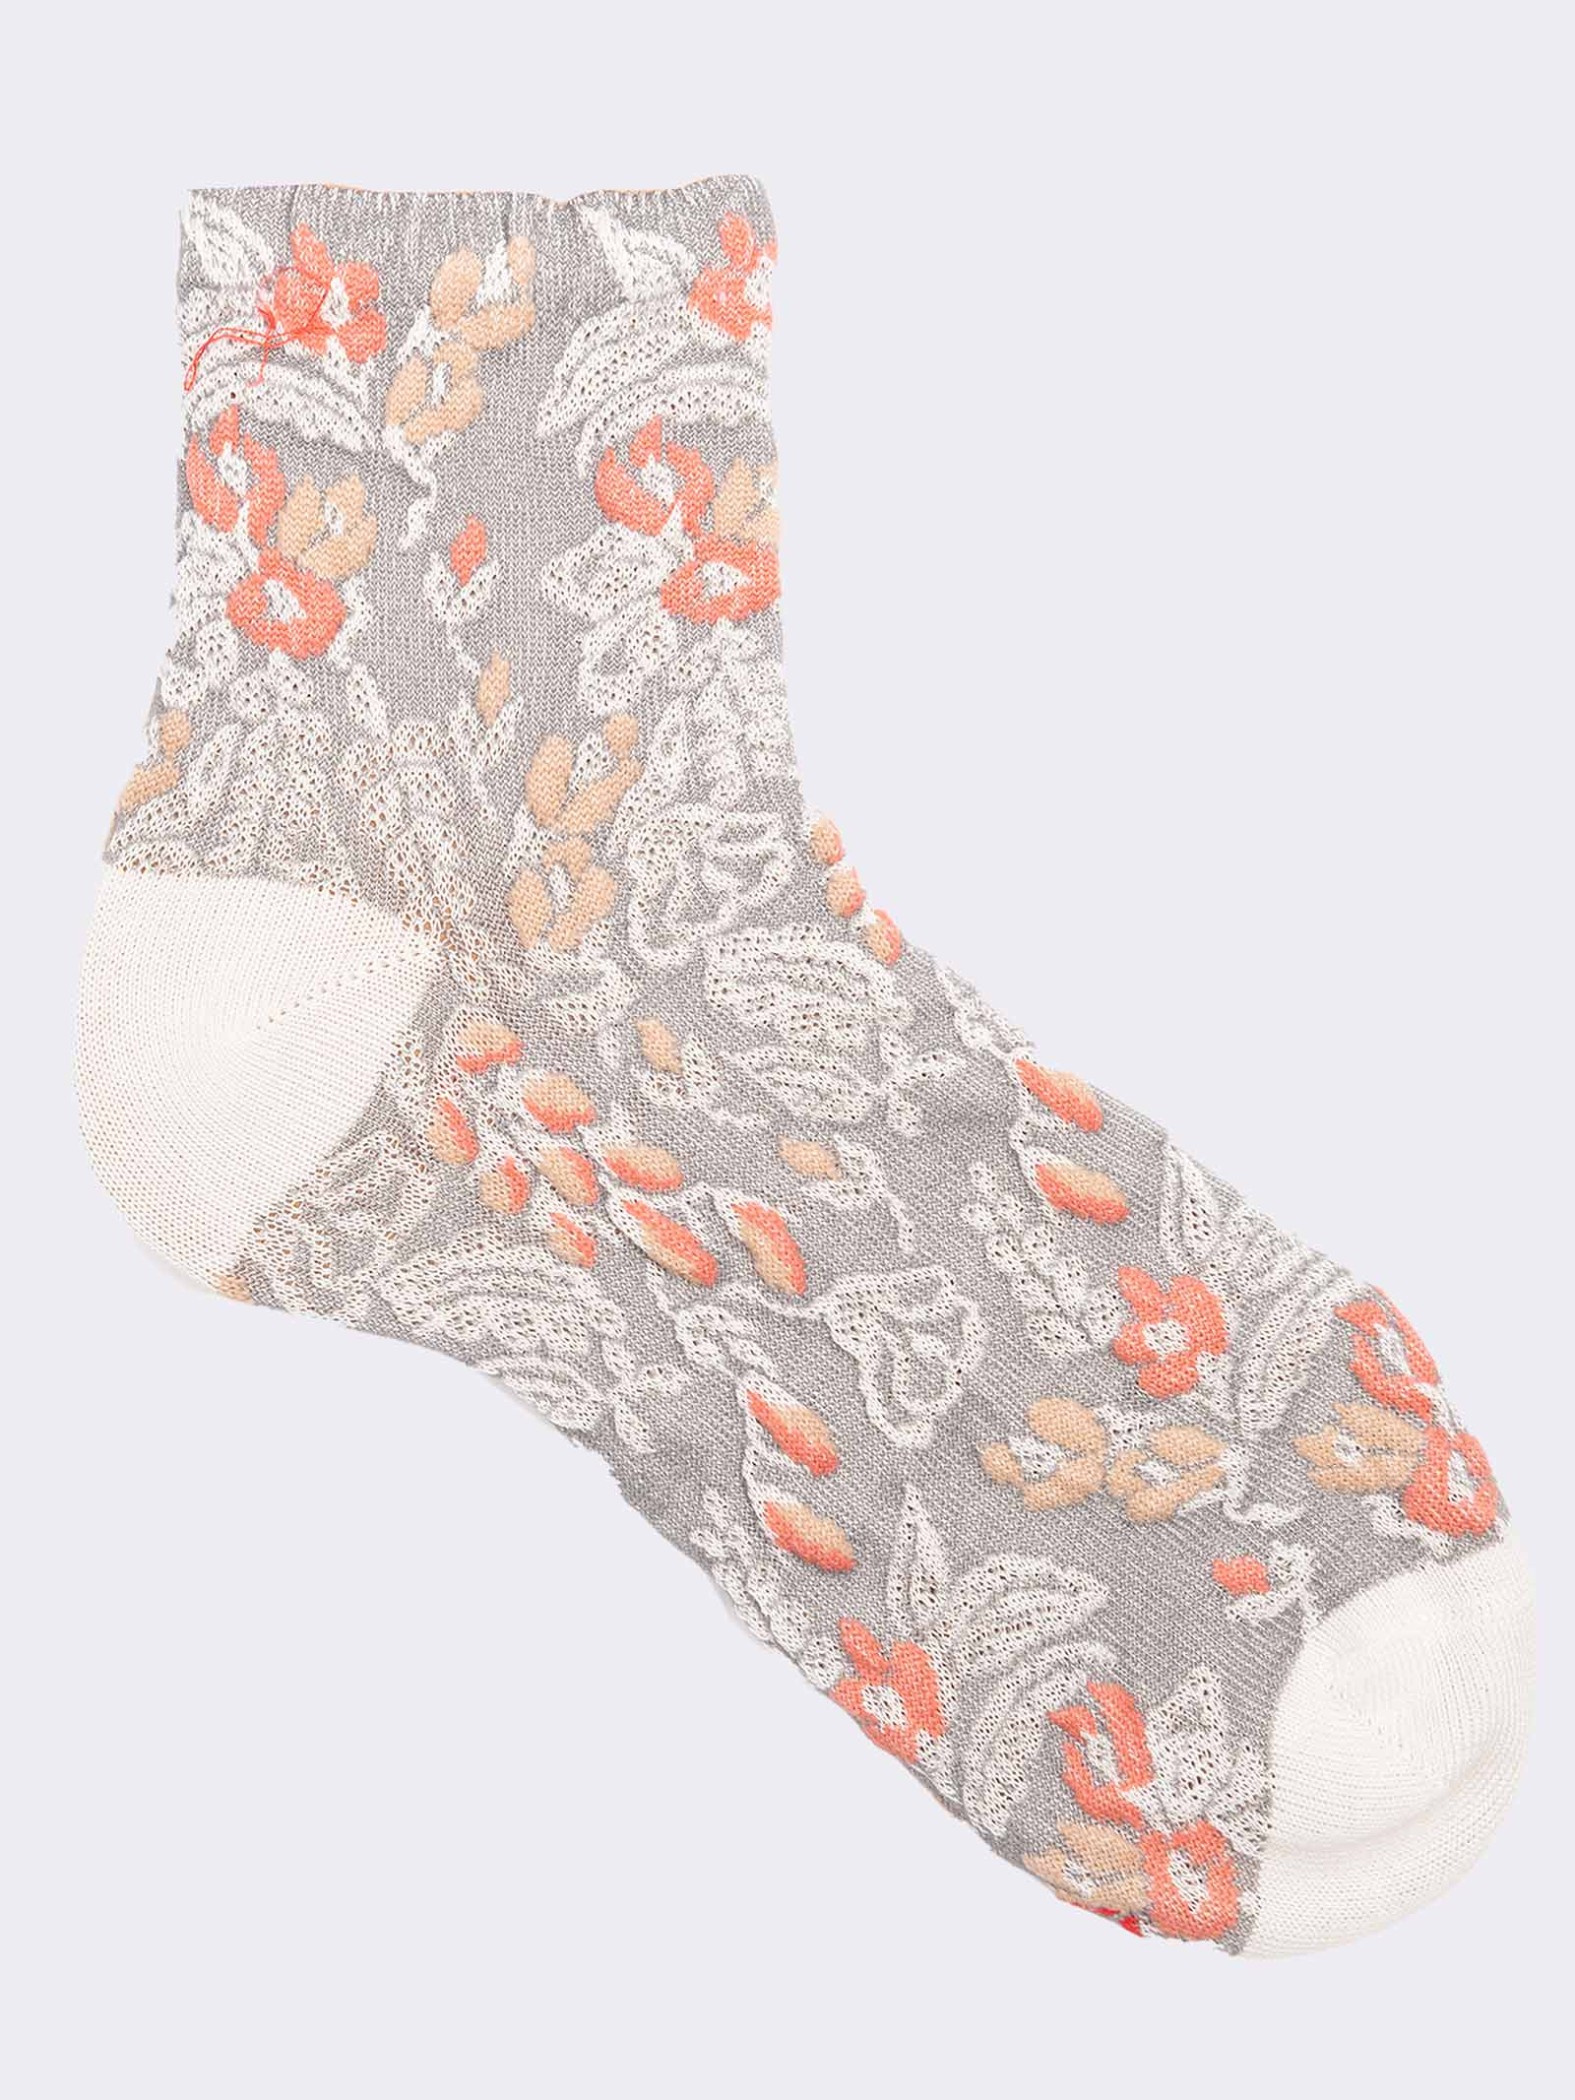 Women's embossed flower patterned cotton calf socks - Made in Italy